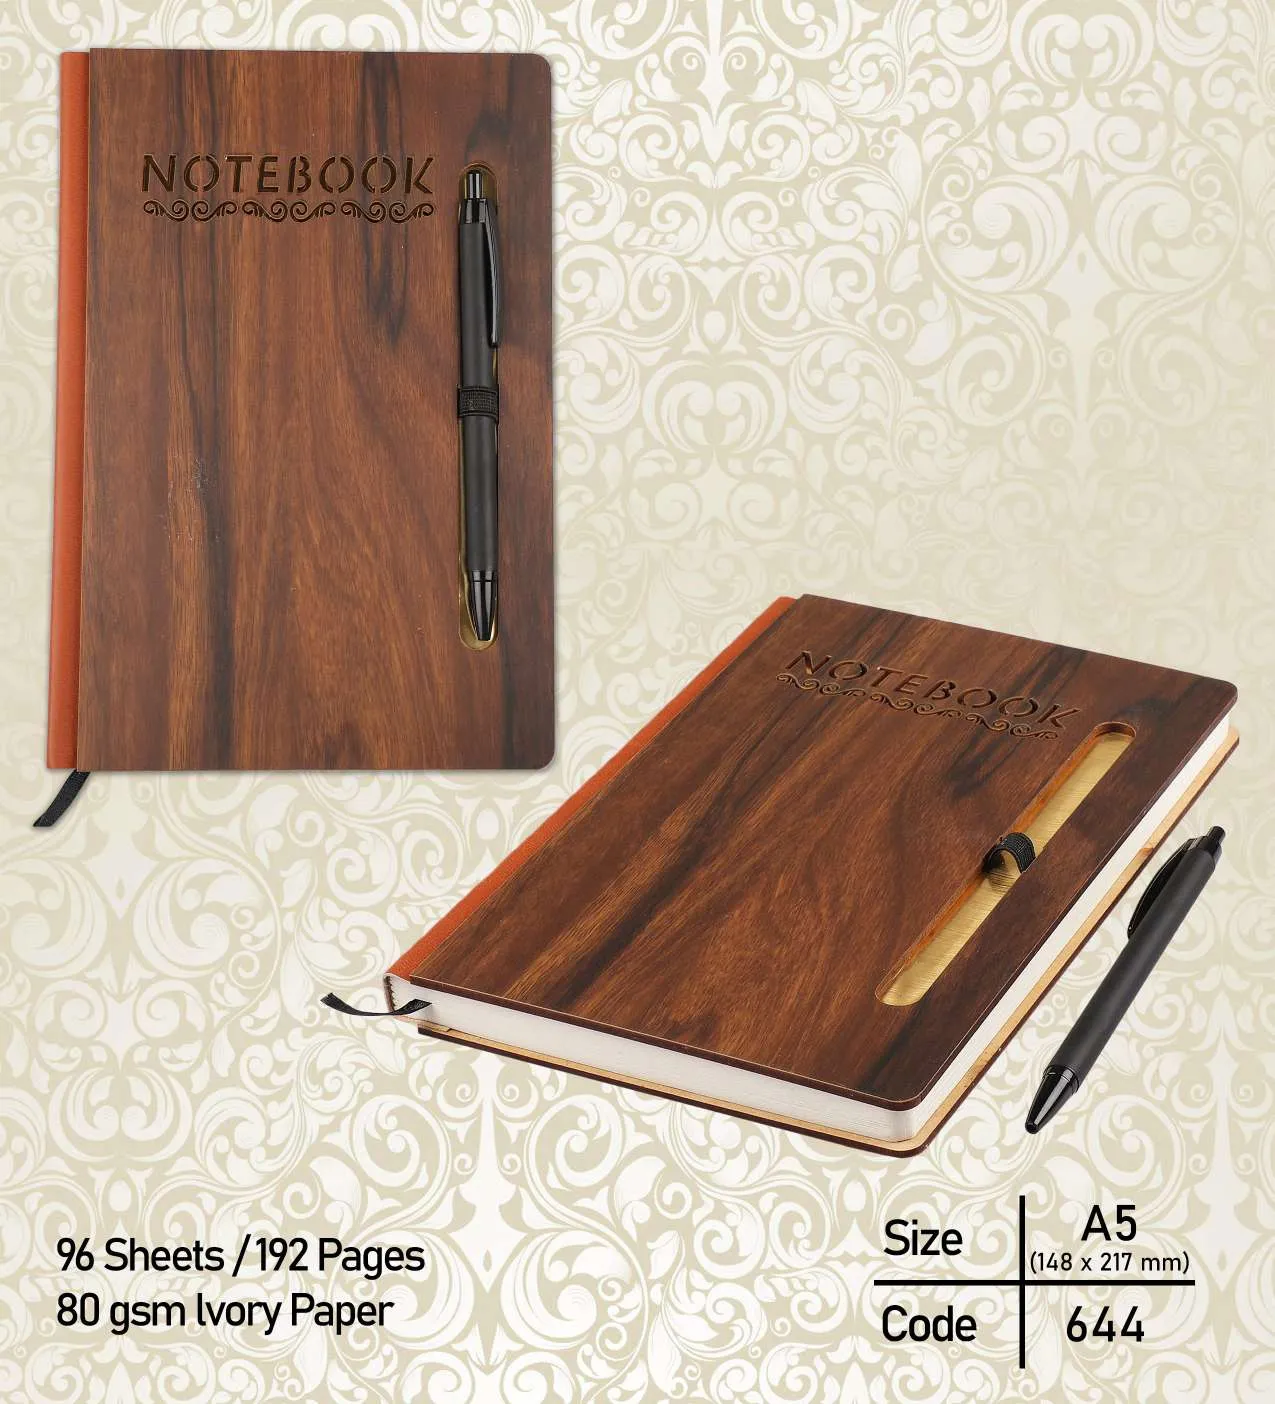 Trending Wholesale Cheap Price Notebook Diary Notebook Diaries for Gift Office Employees School Teachers College Students